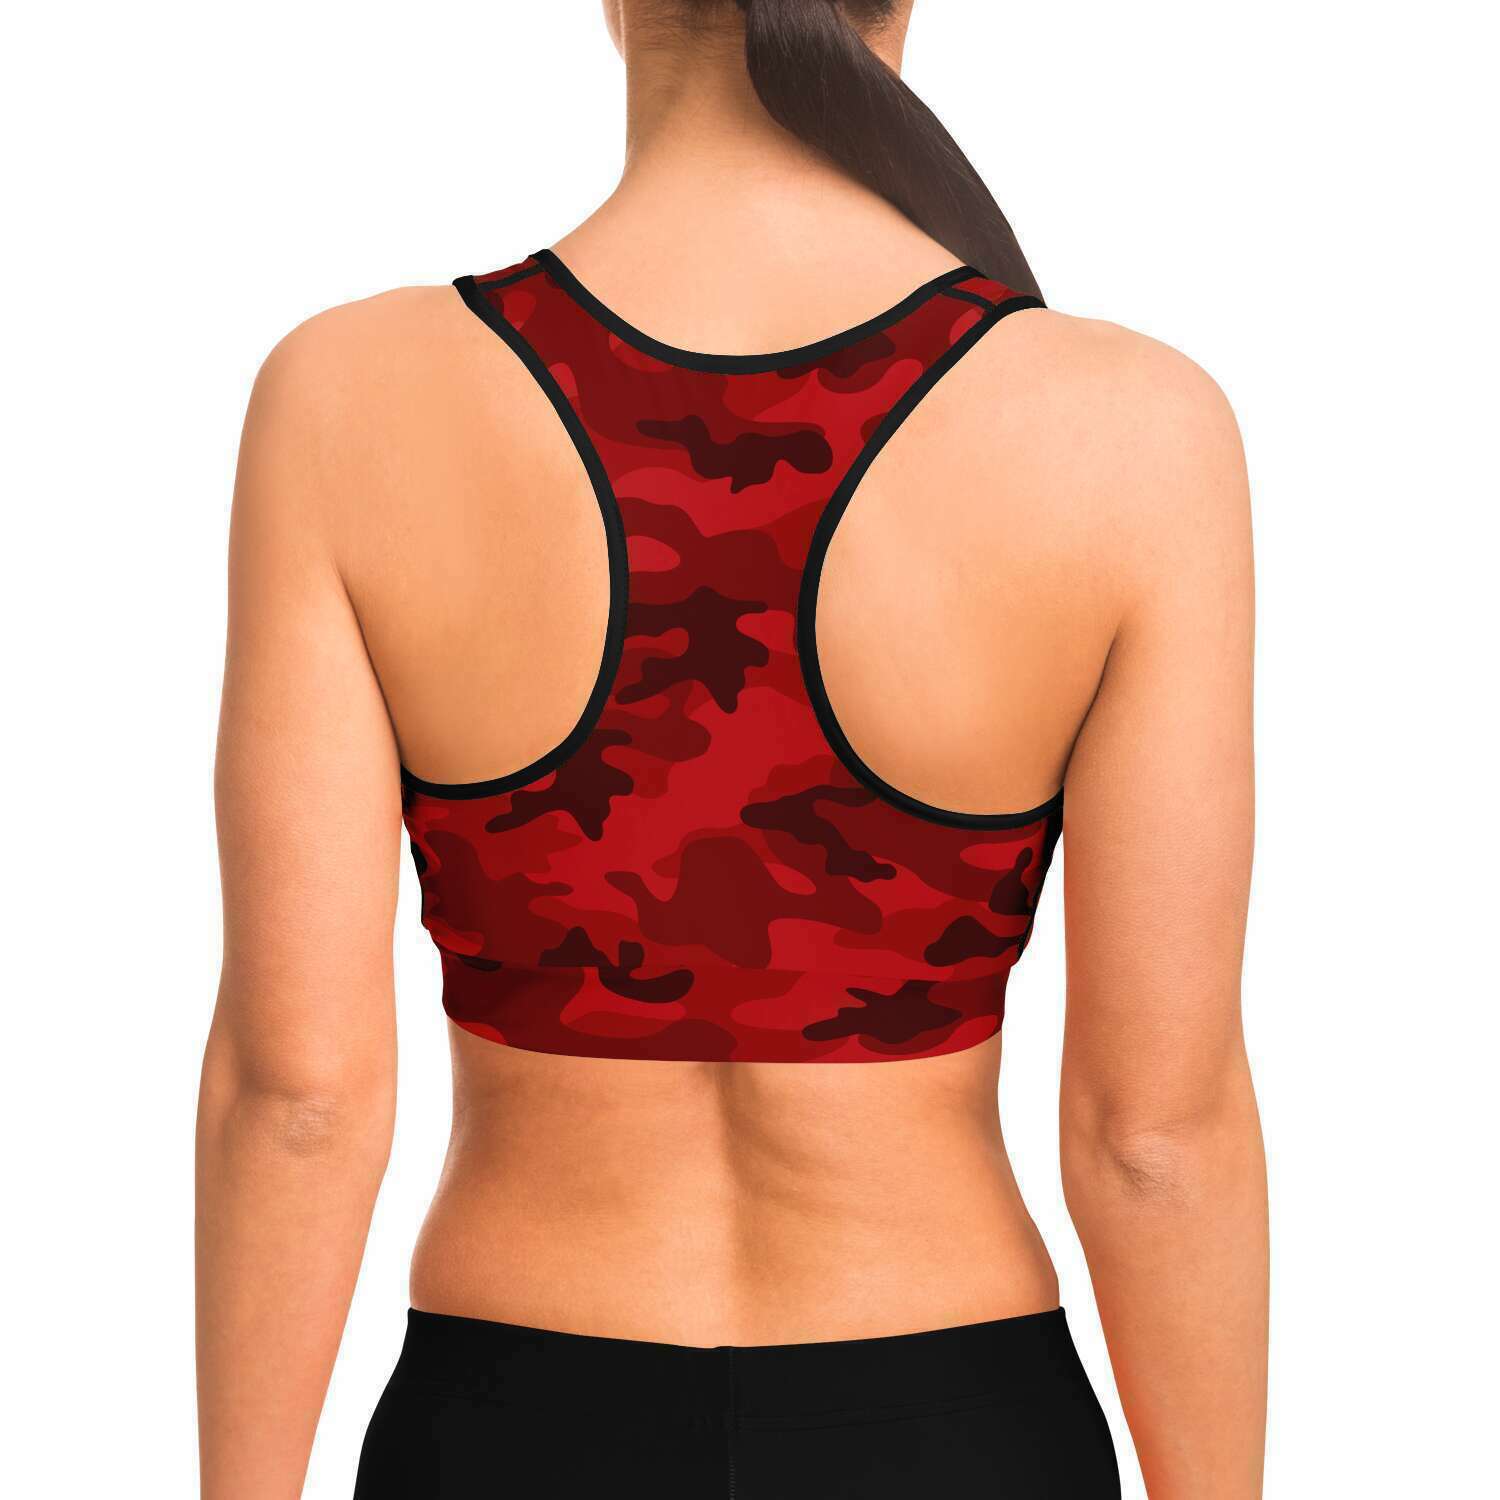 Women's All Red Camouflage Athletic Sports Bra Model Back